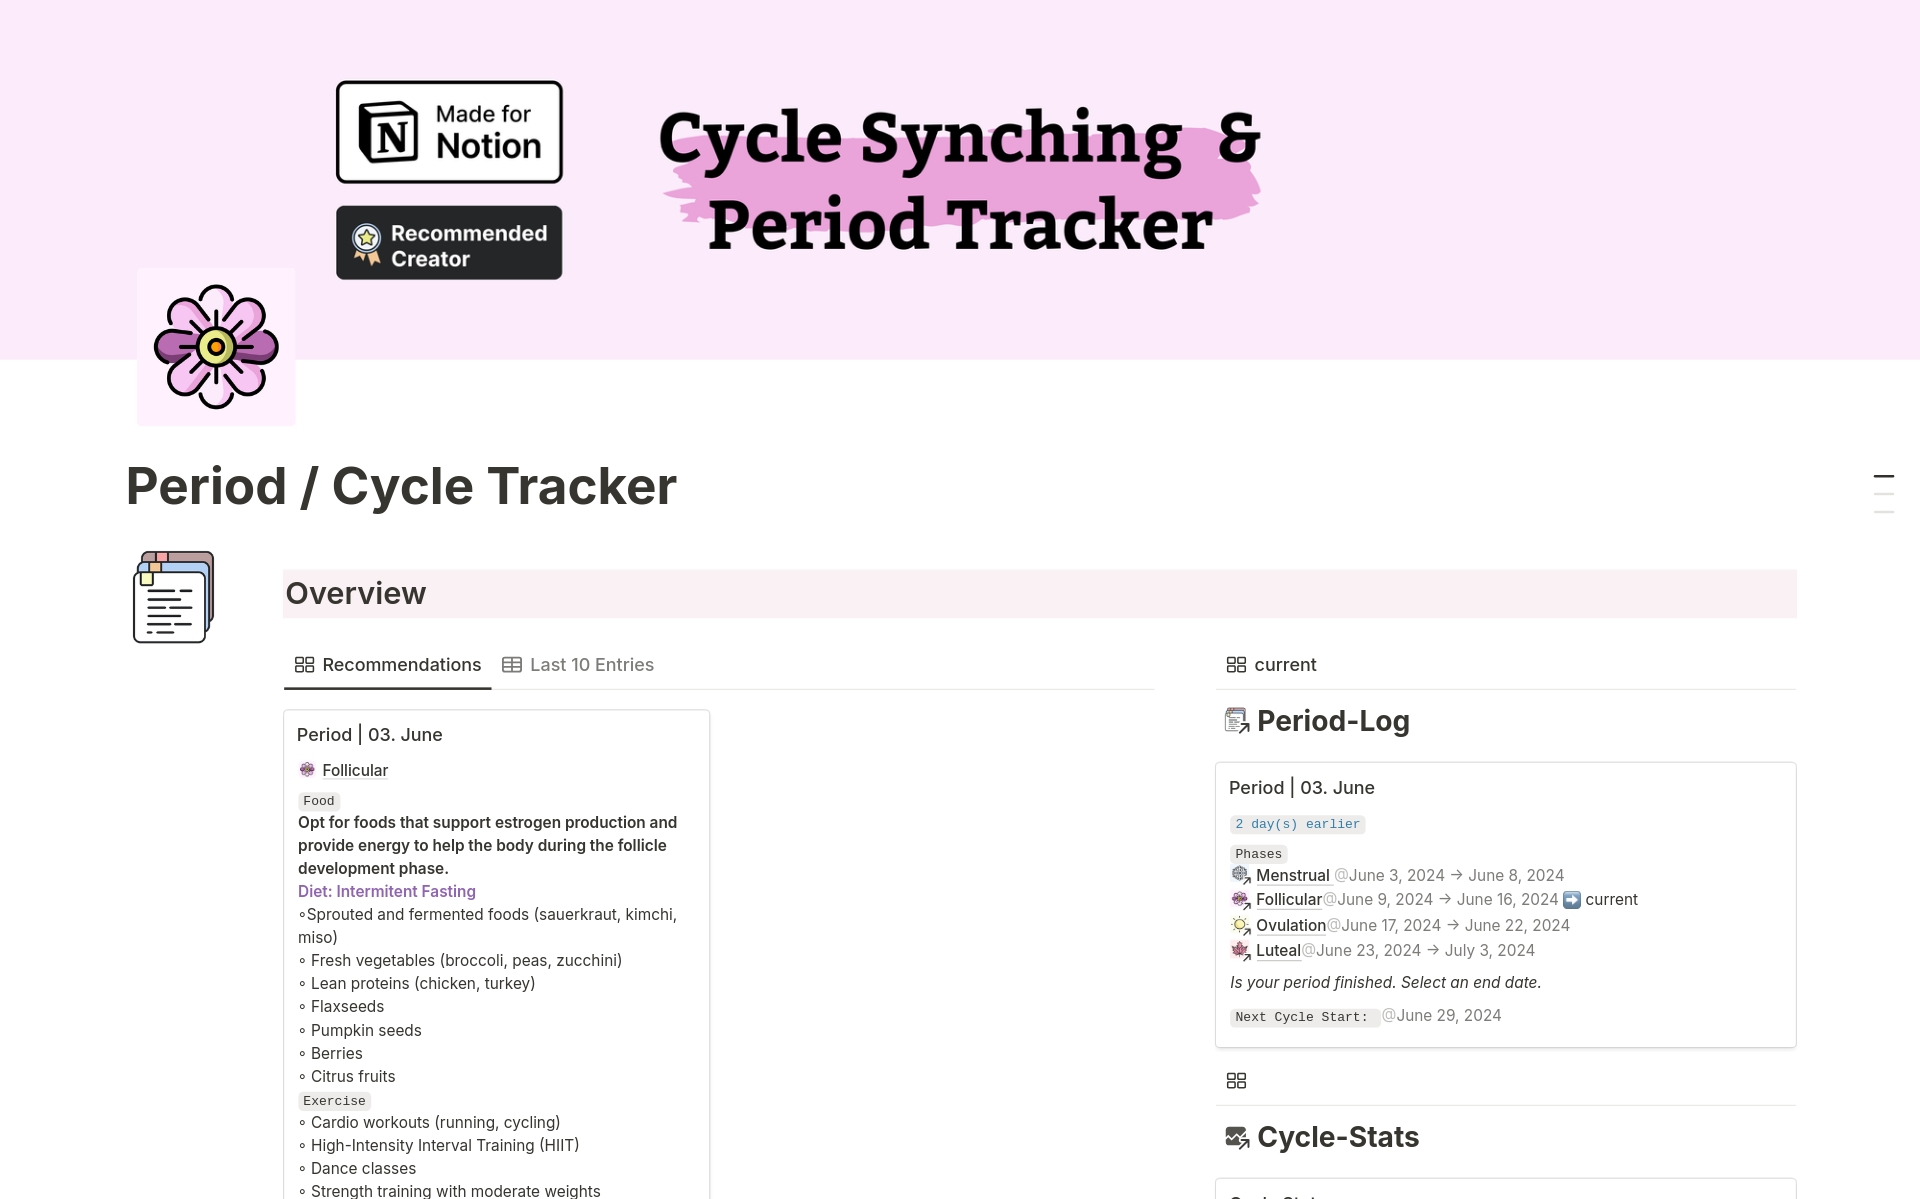 More than just tracking, match your life to your cycle. Period.